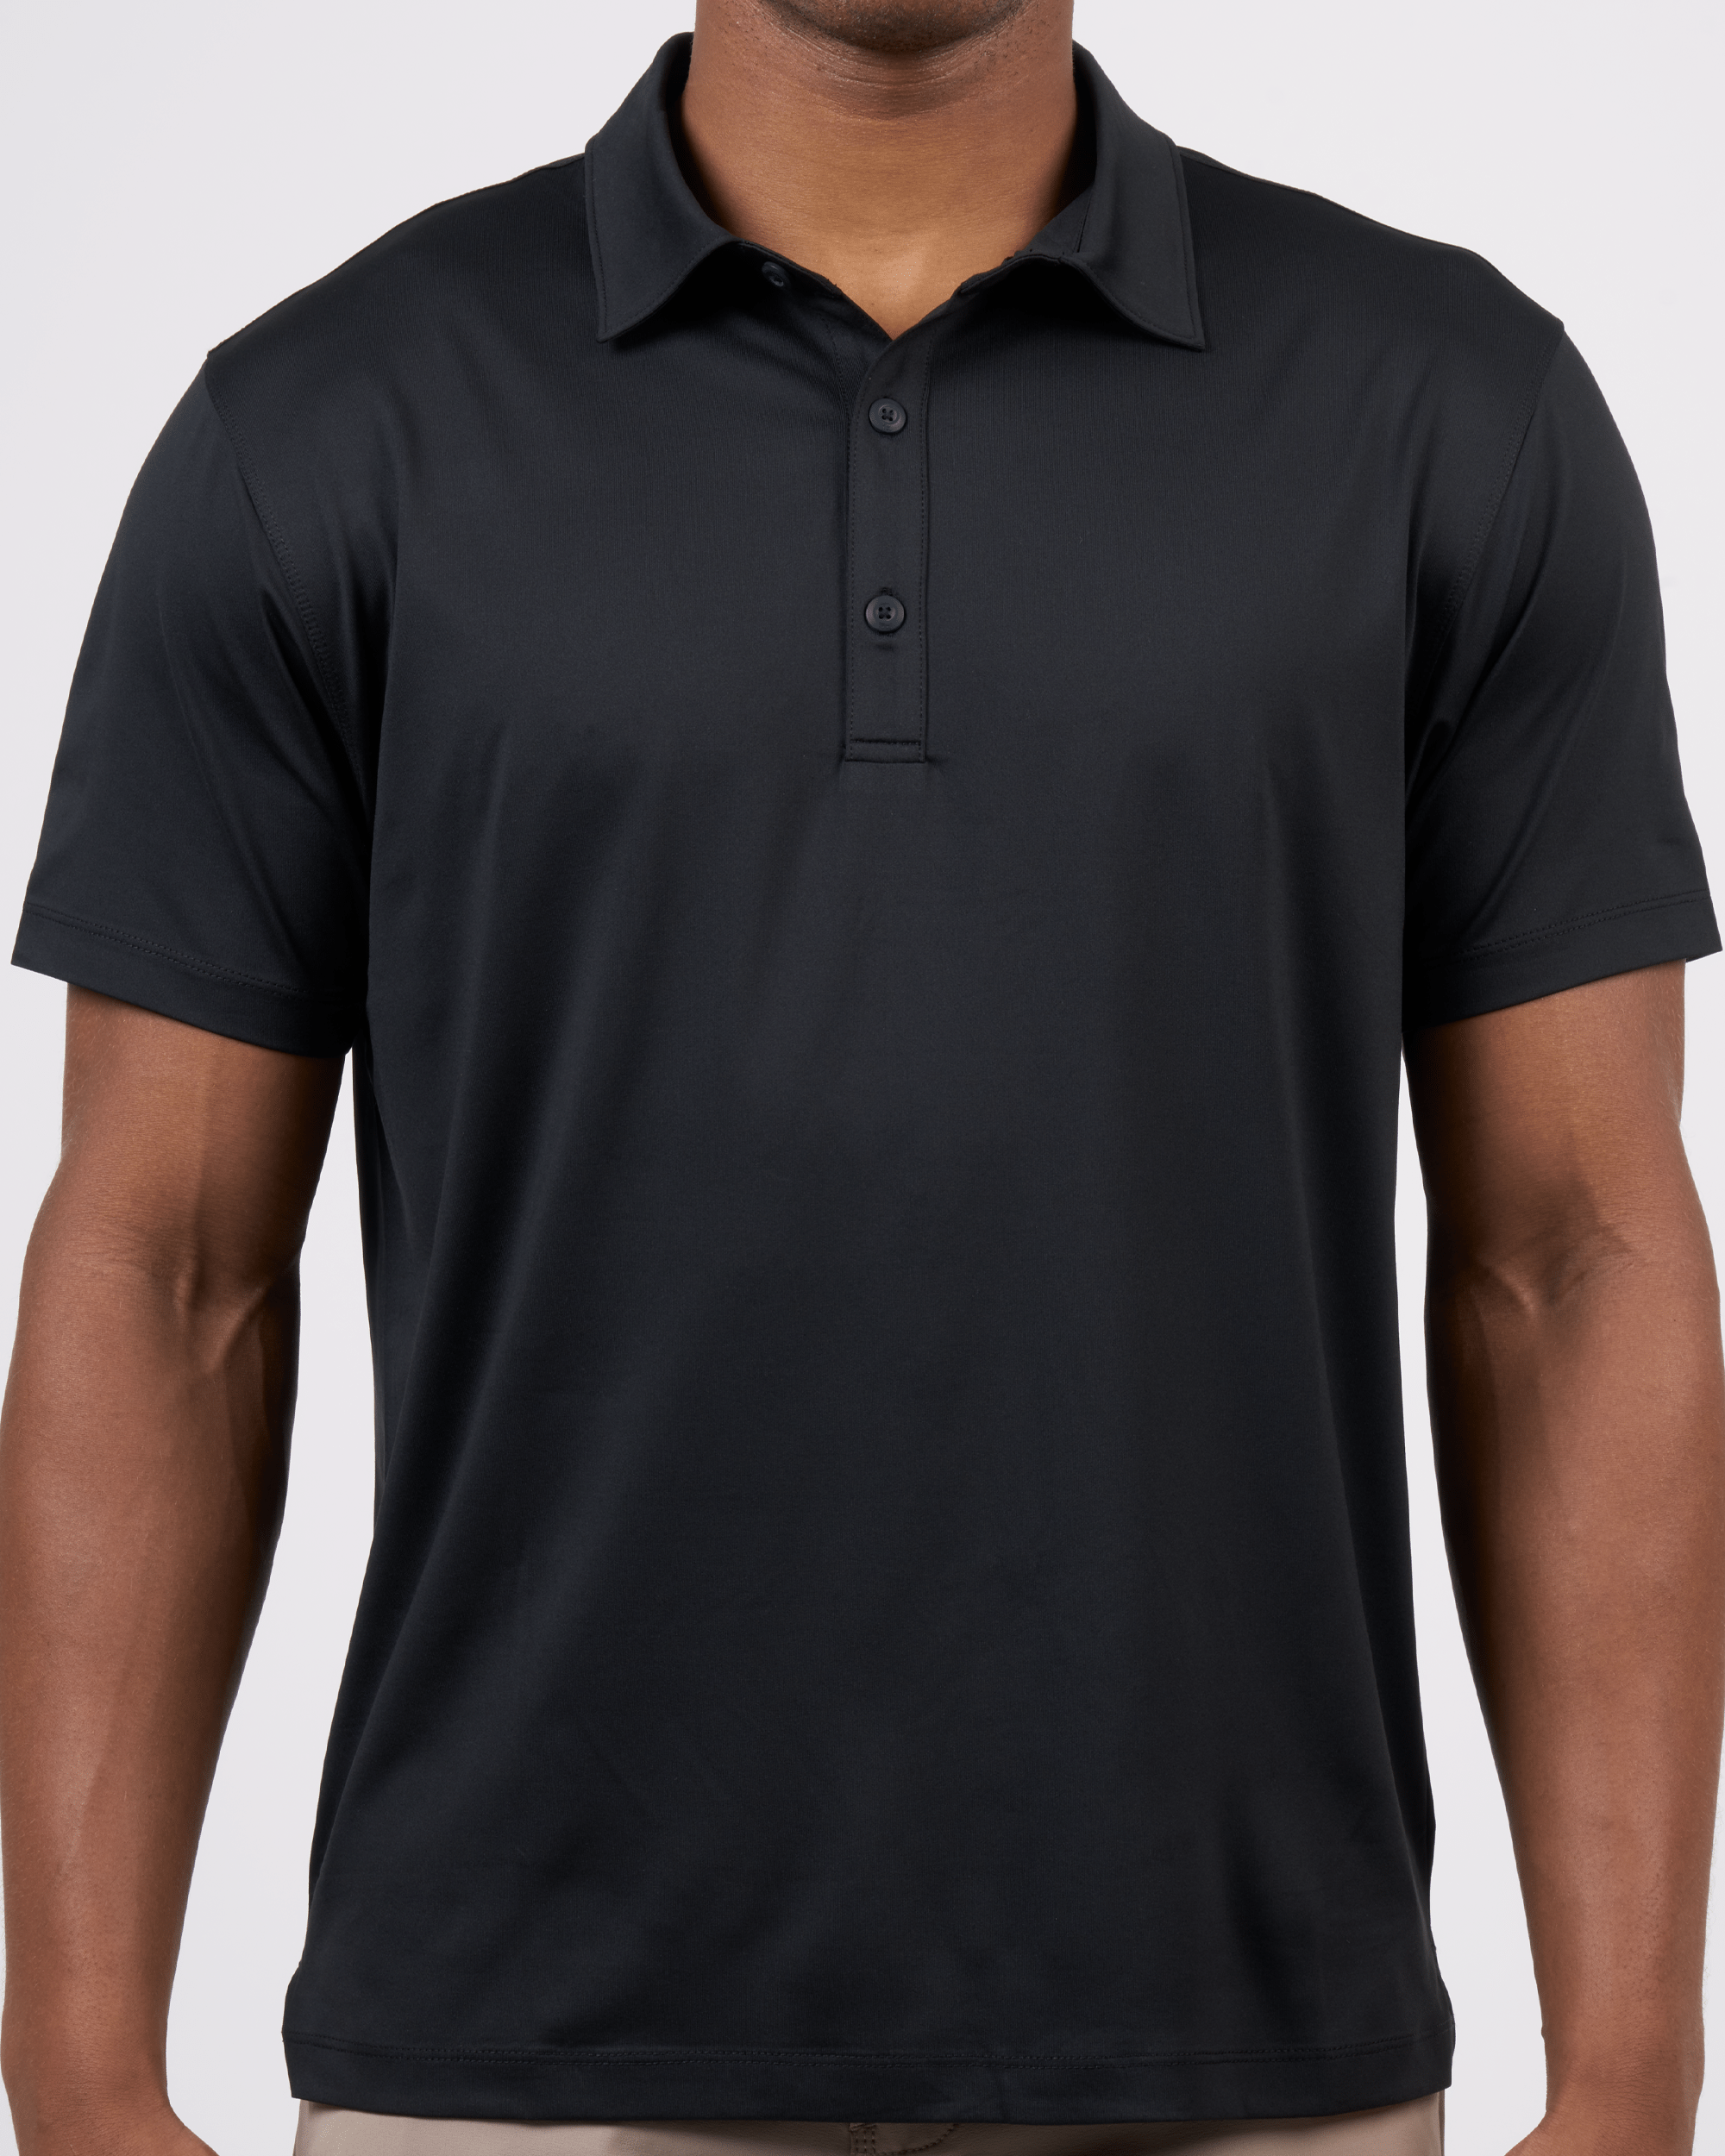 Foreign Rider Co Technical Fabric Black Polo Chest 3 Button Detail